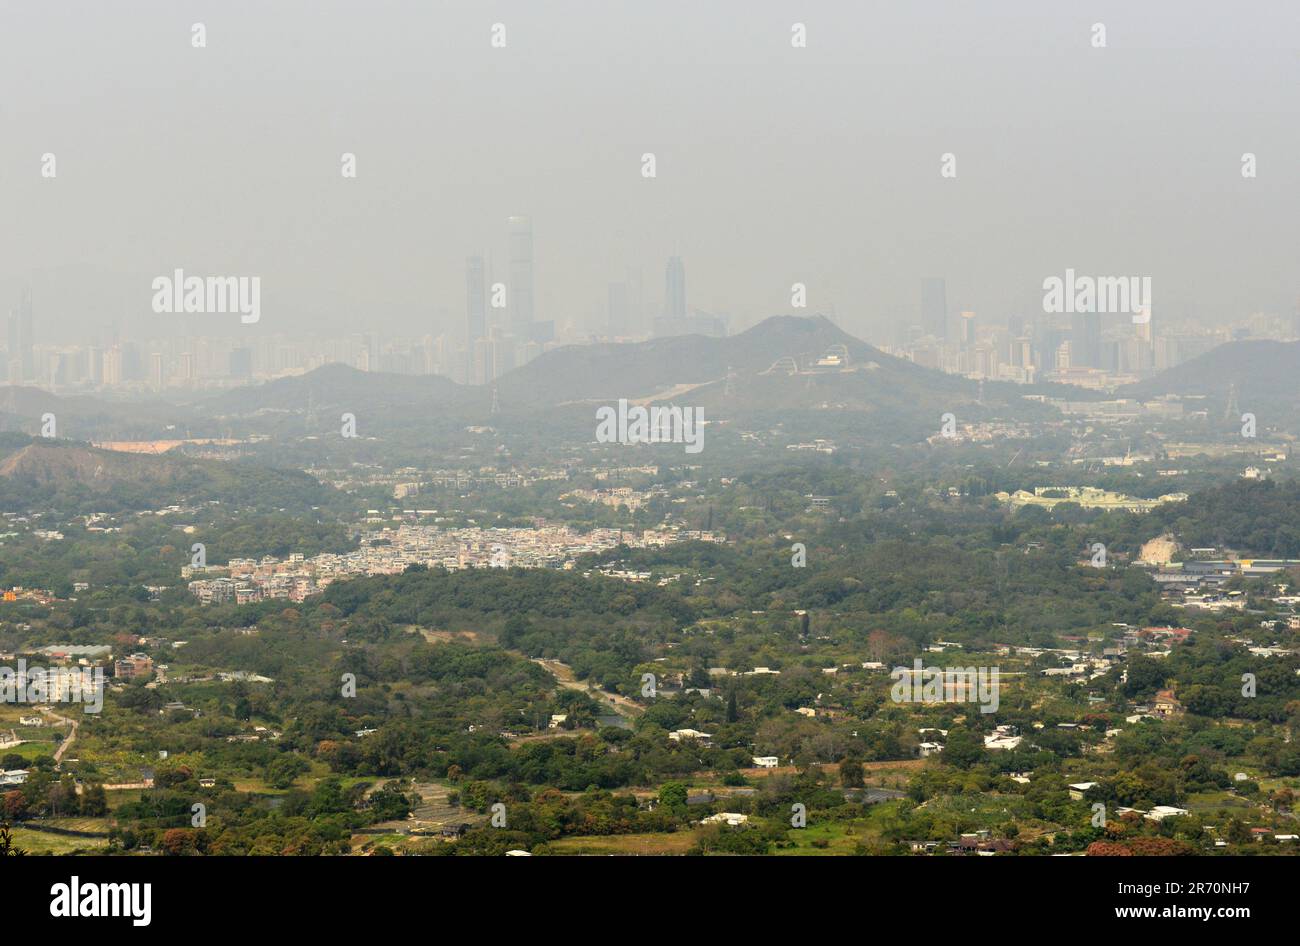 A view of Shenzhen from Kai Kung Shan mountain in the New Territories in Hong Kong. Stock Photo